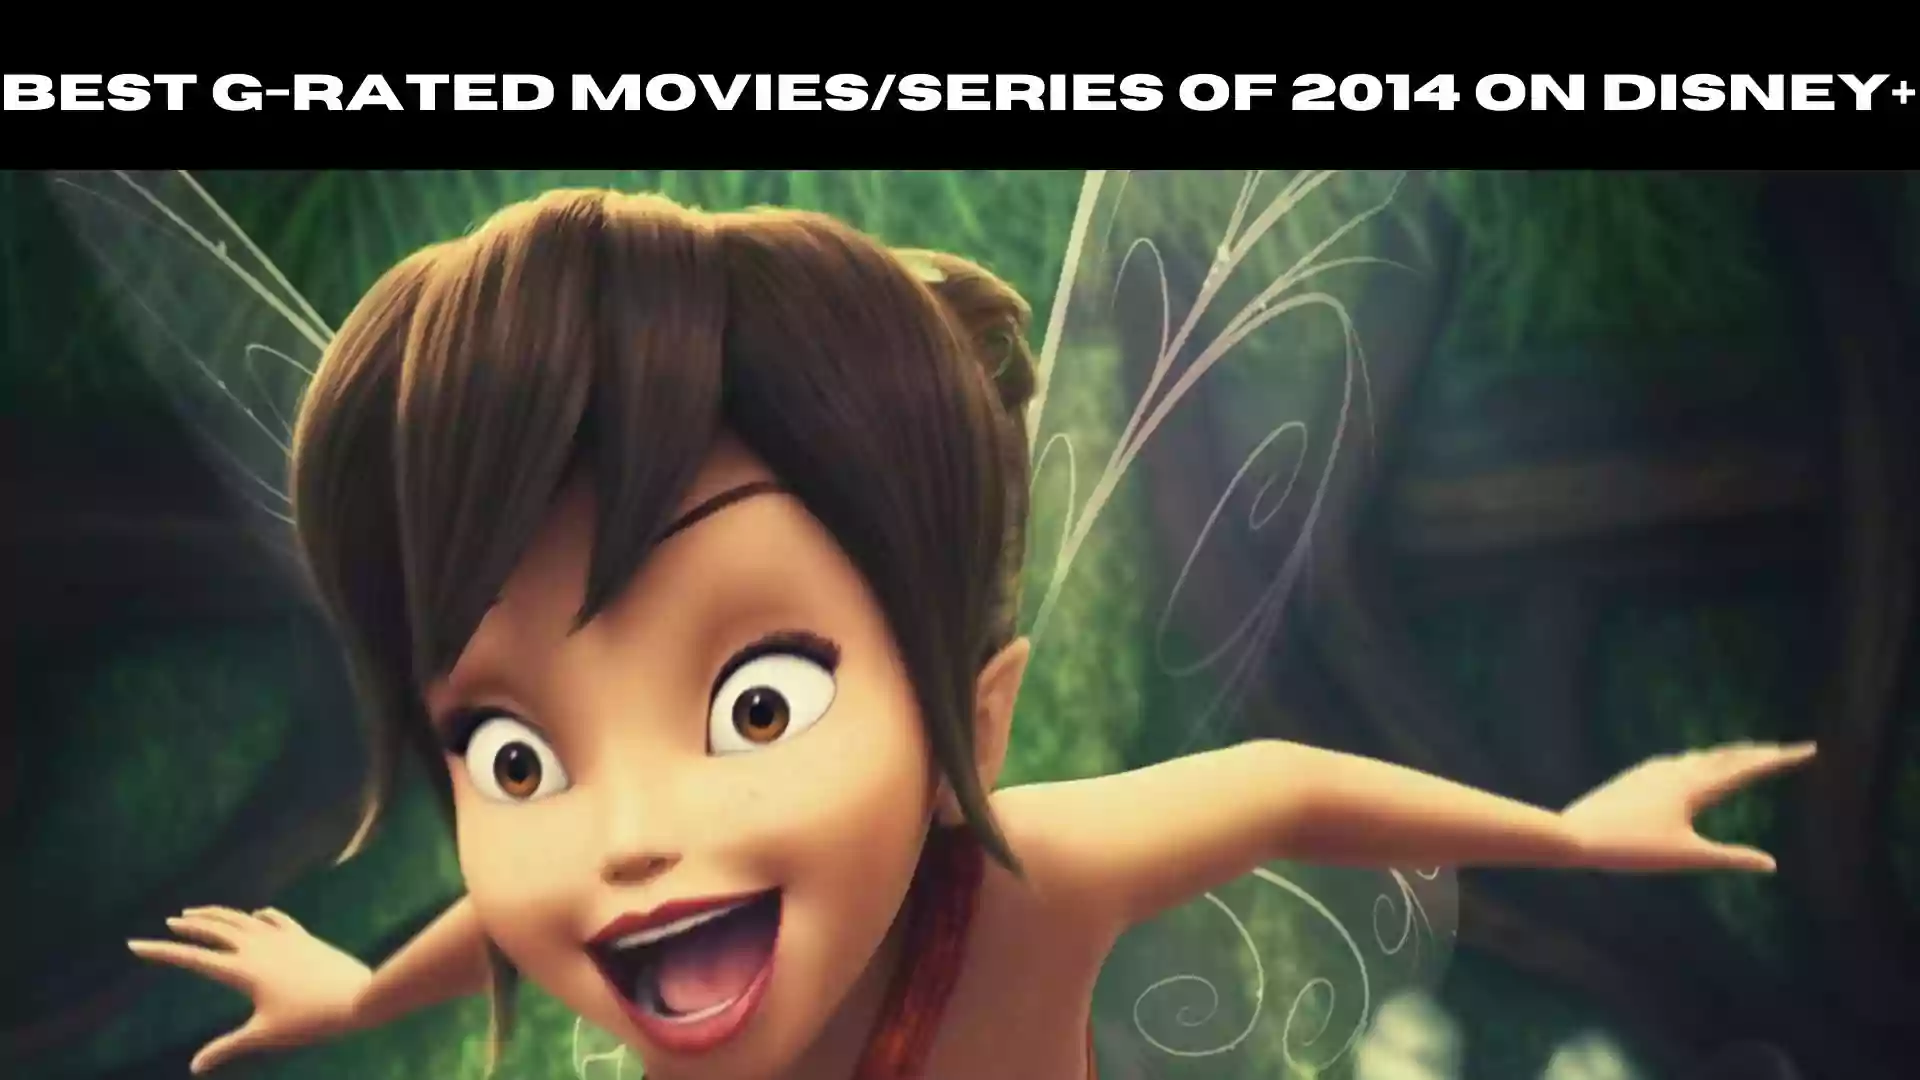 Best G-Rated Movies/series of 2014 on Disney+